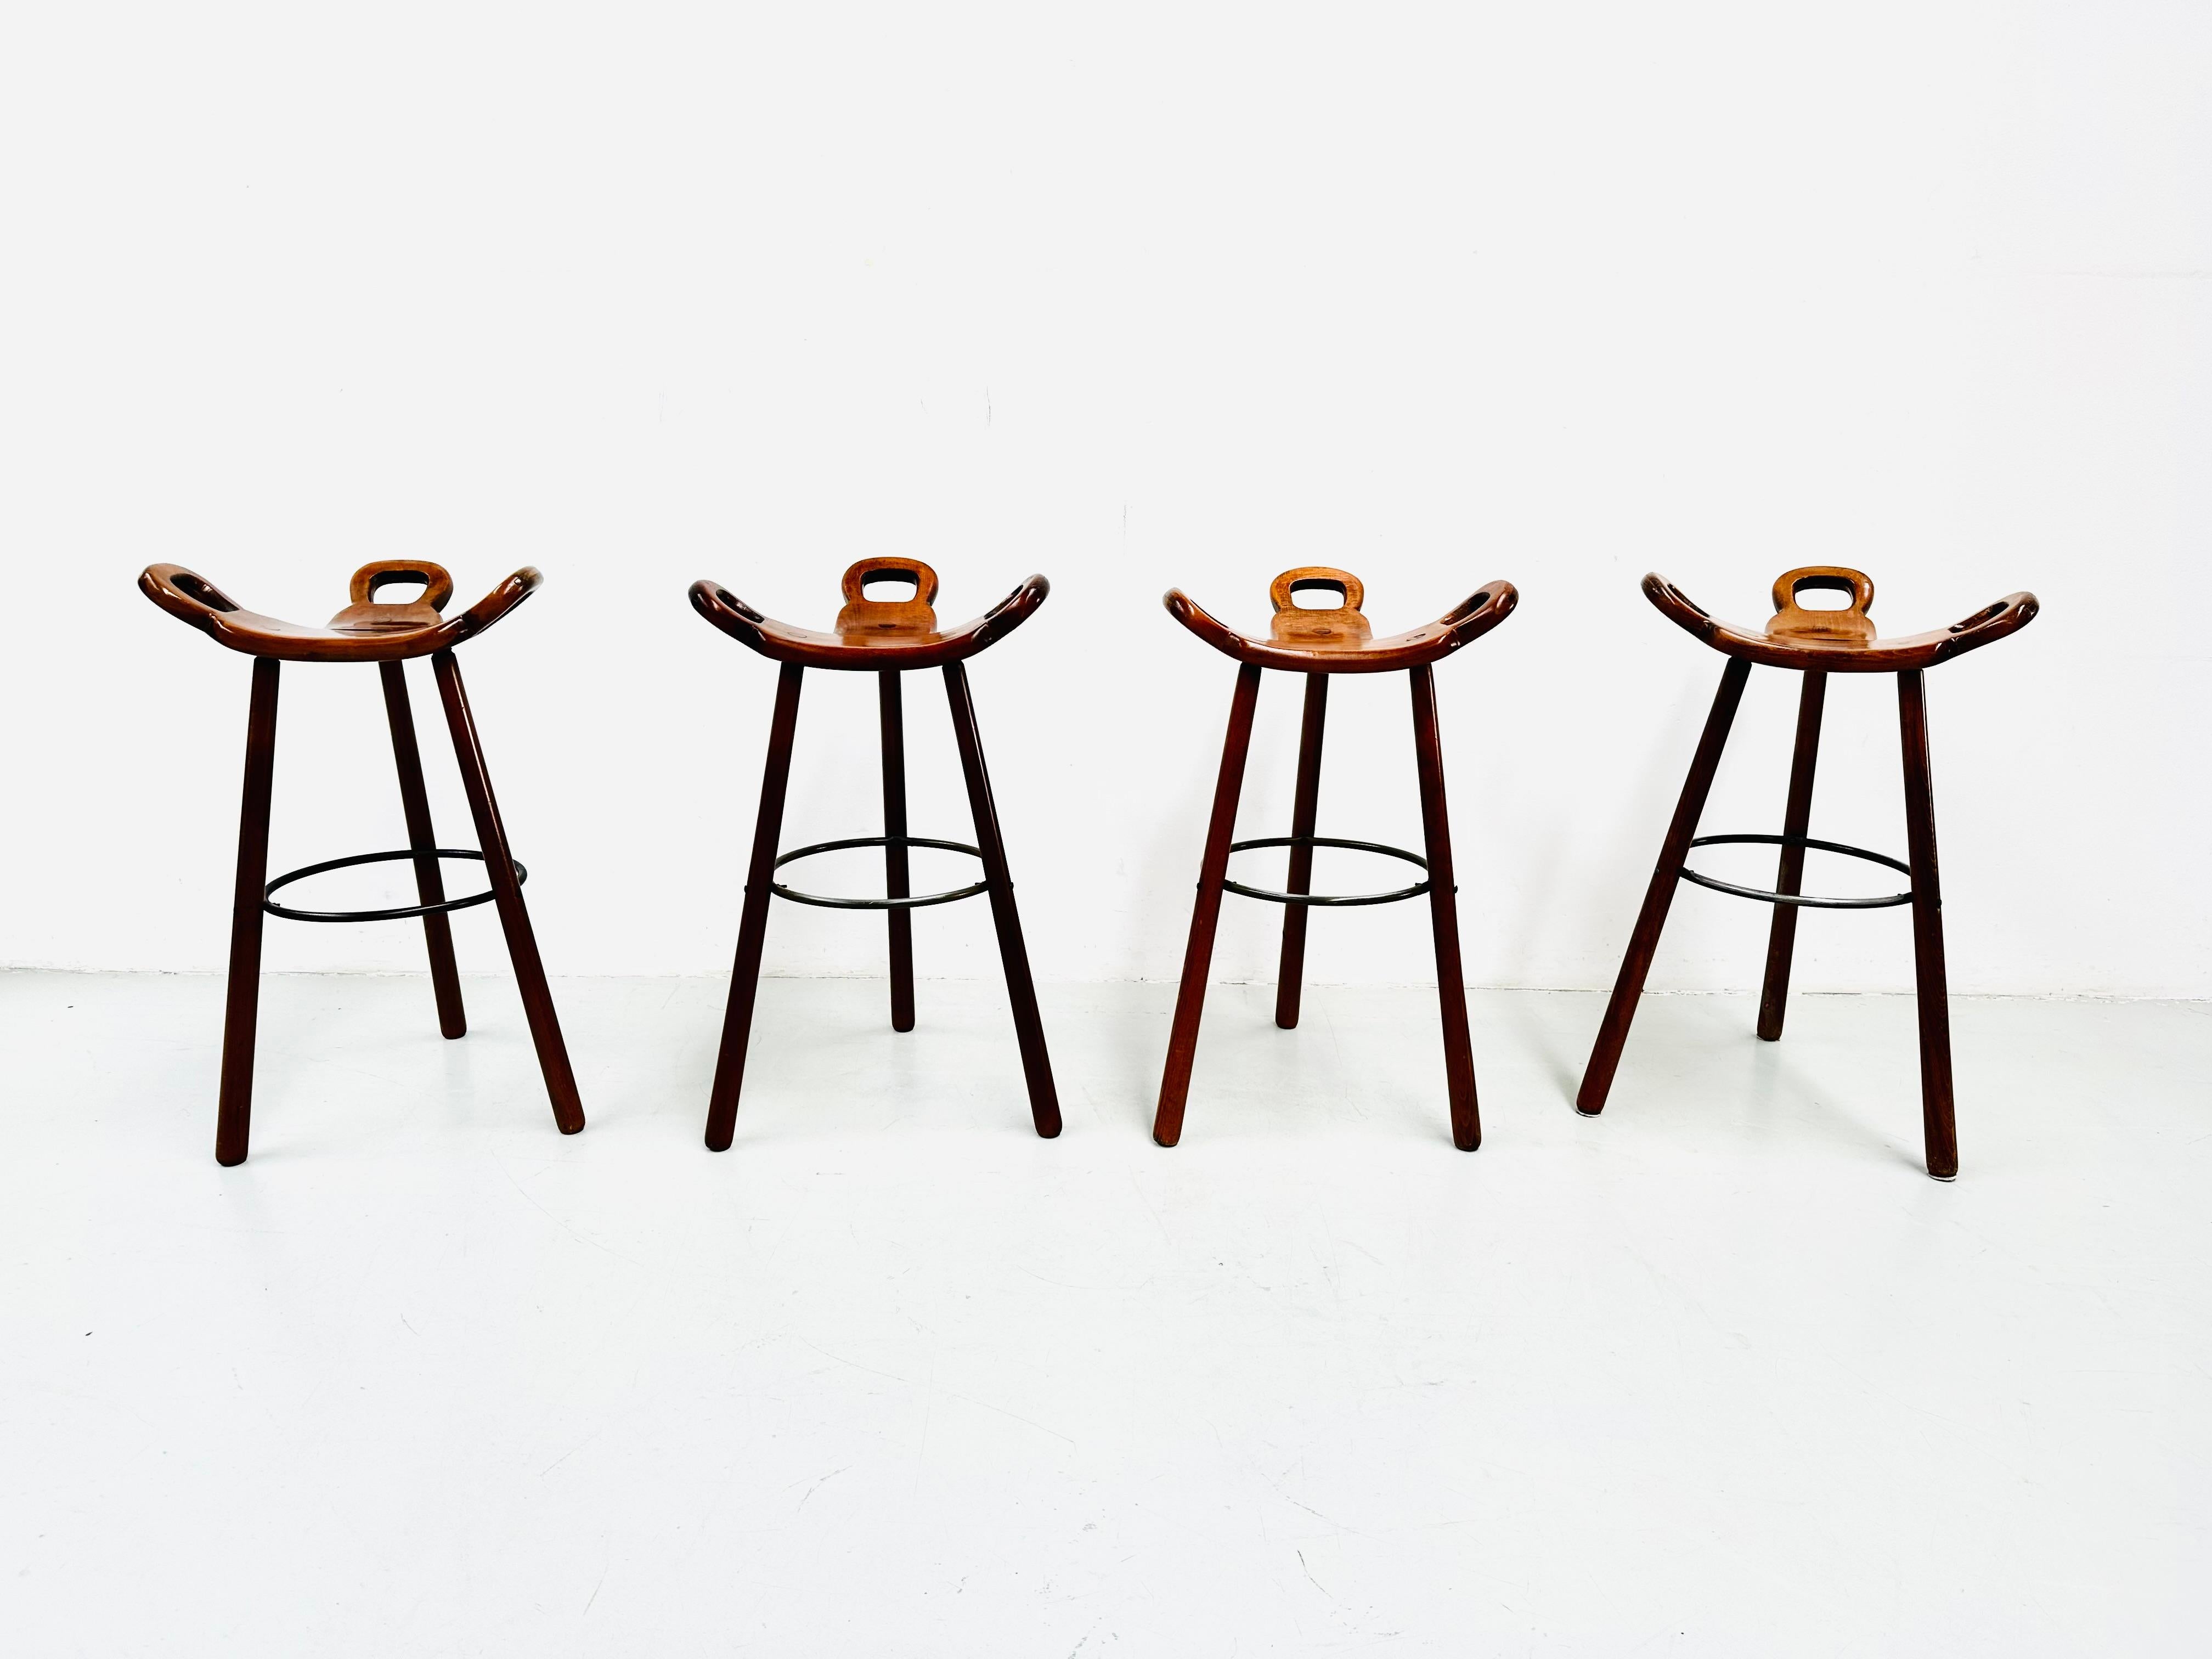 Late 20th Century Set of 4 Marbella Brutalist Stools by Sergio Rodrigues for Confonorm 1970s. For Sale